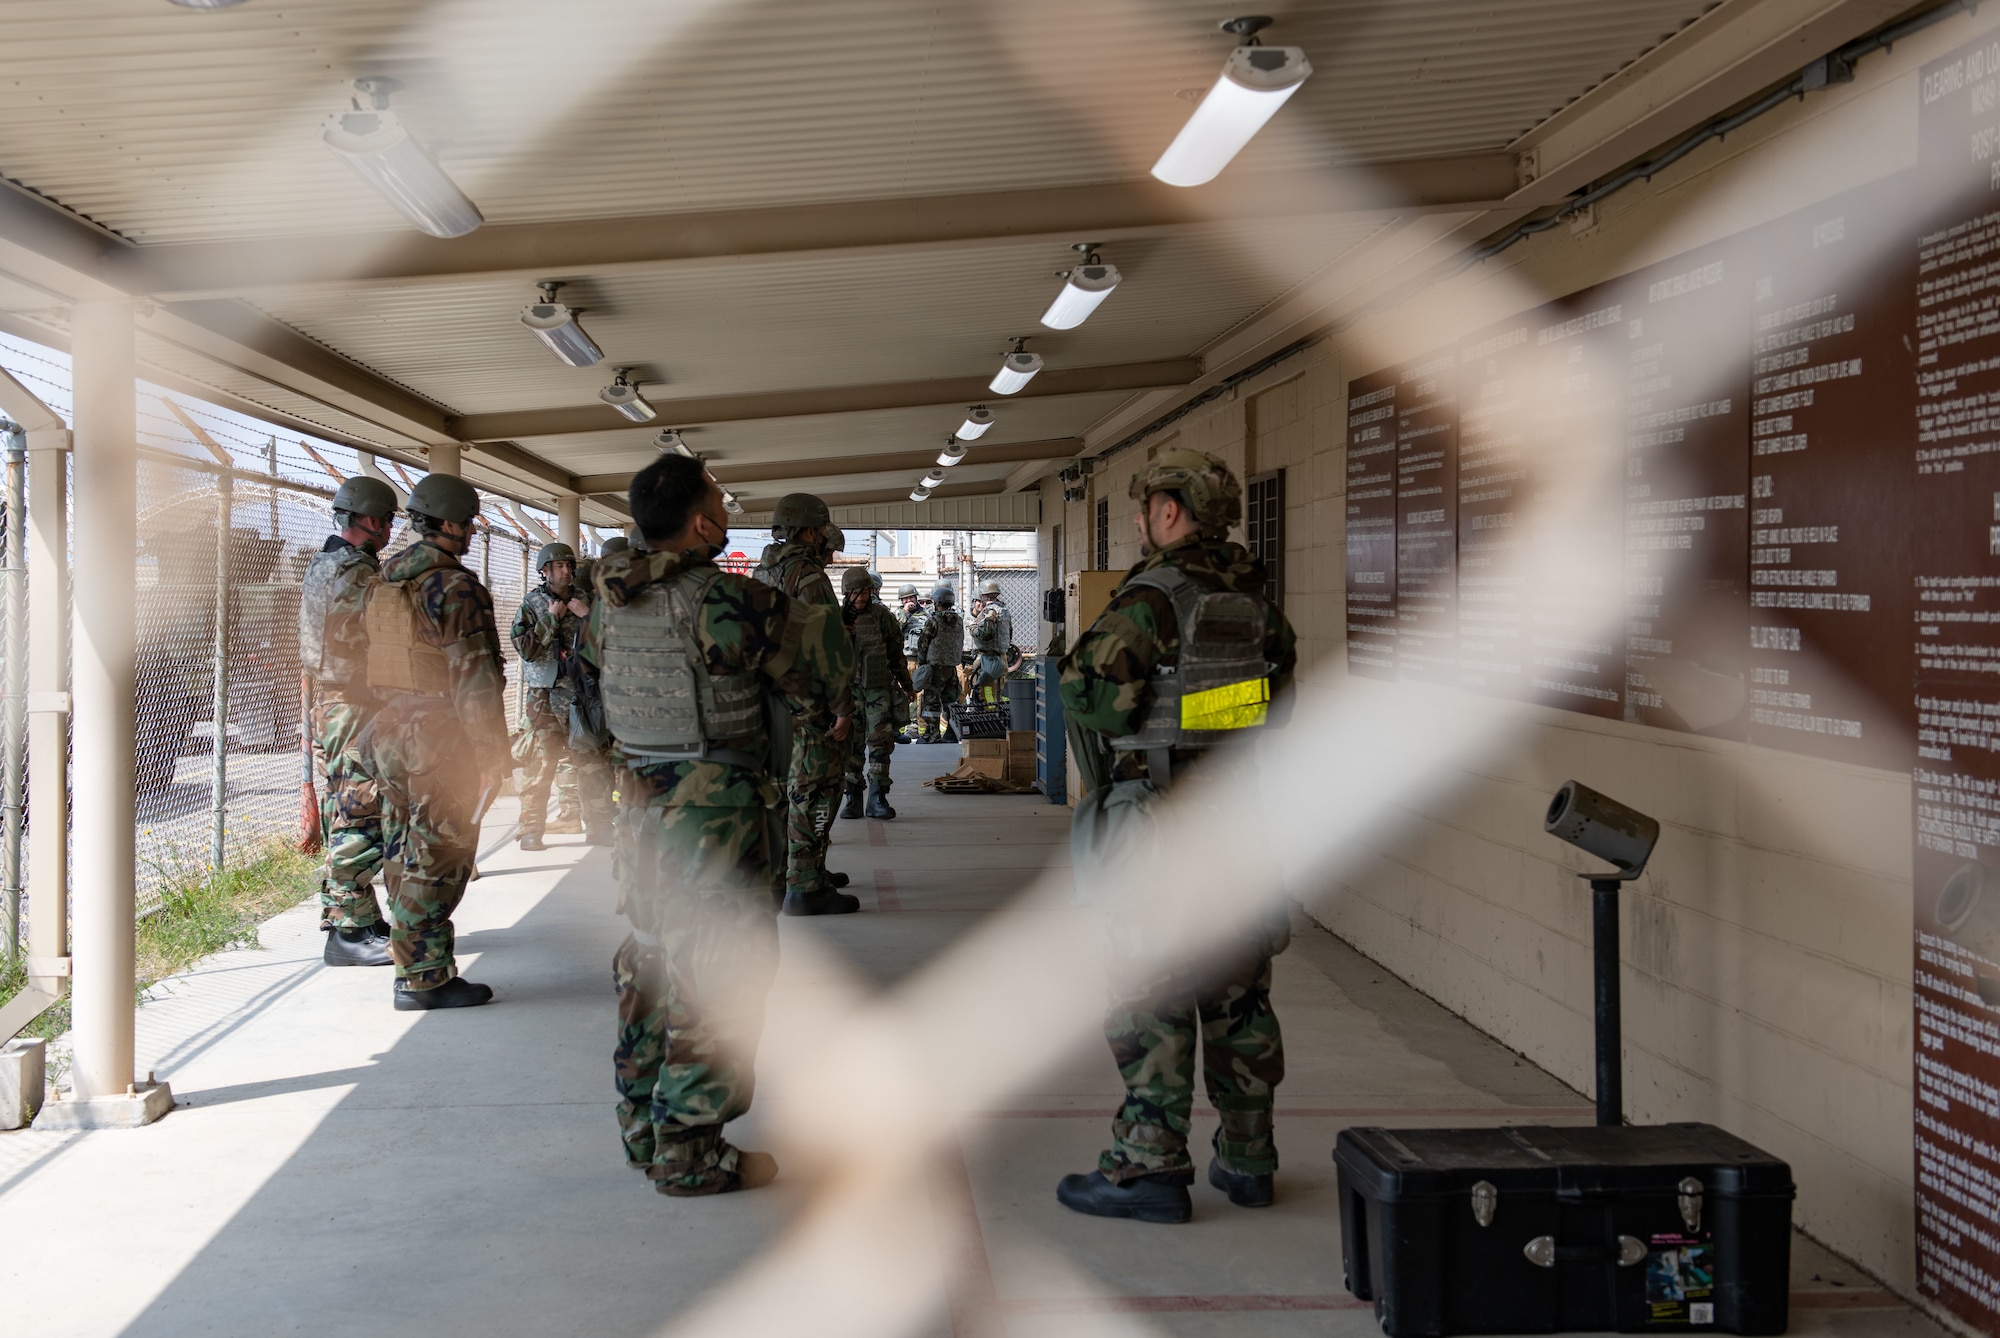 Airmen assigned to the 8th Fighter Wing participate in the selective arming program (SELARM) during routine training at Kunsan Air Base, Republic of Korea, April 24, 2022.